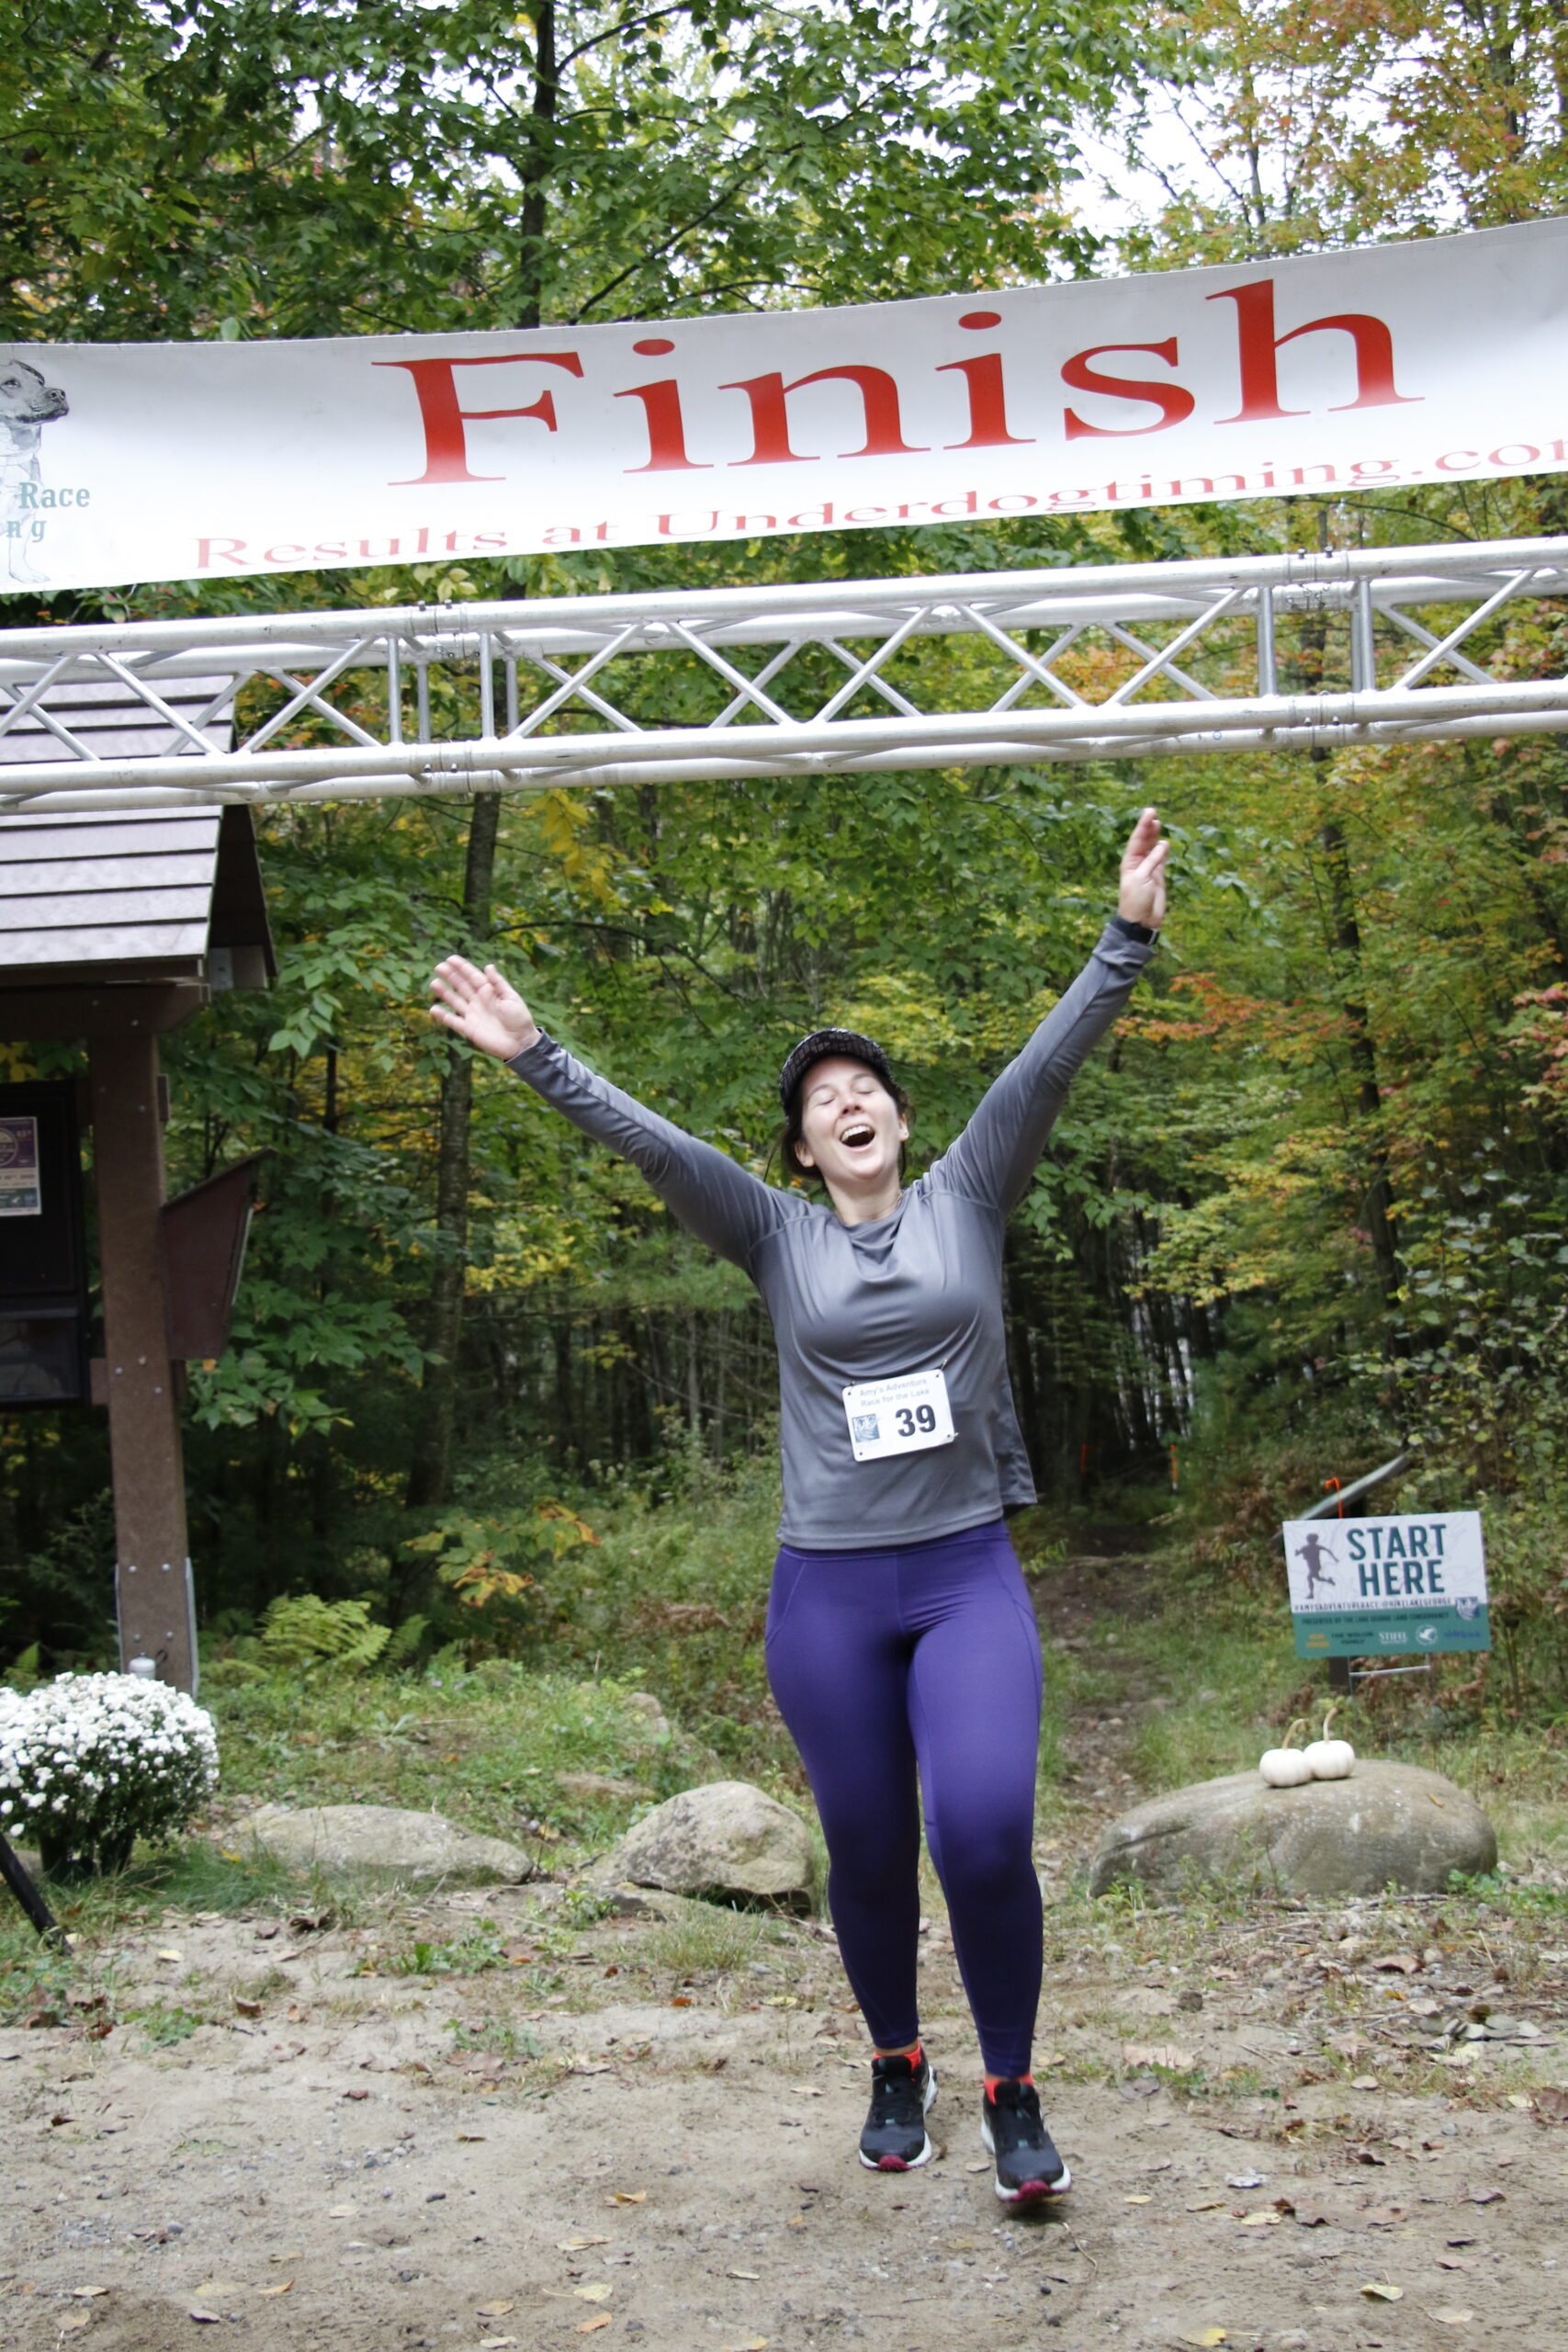 A woman cheers as she crosses the finish line.